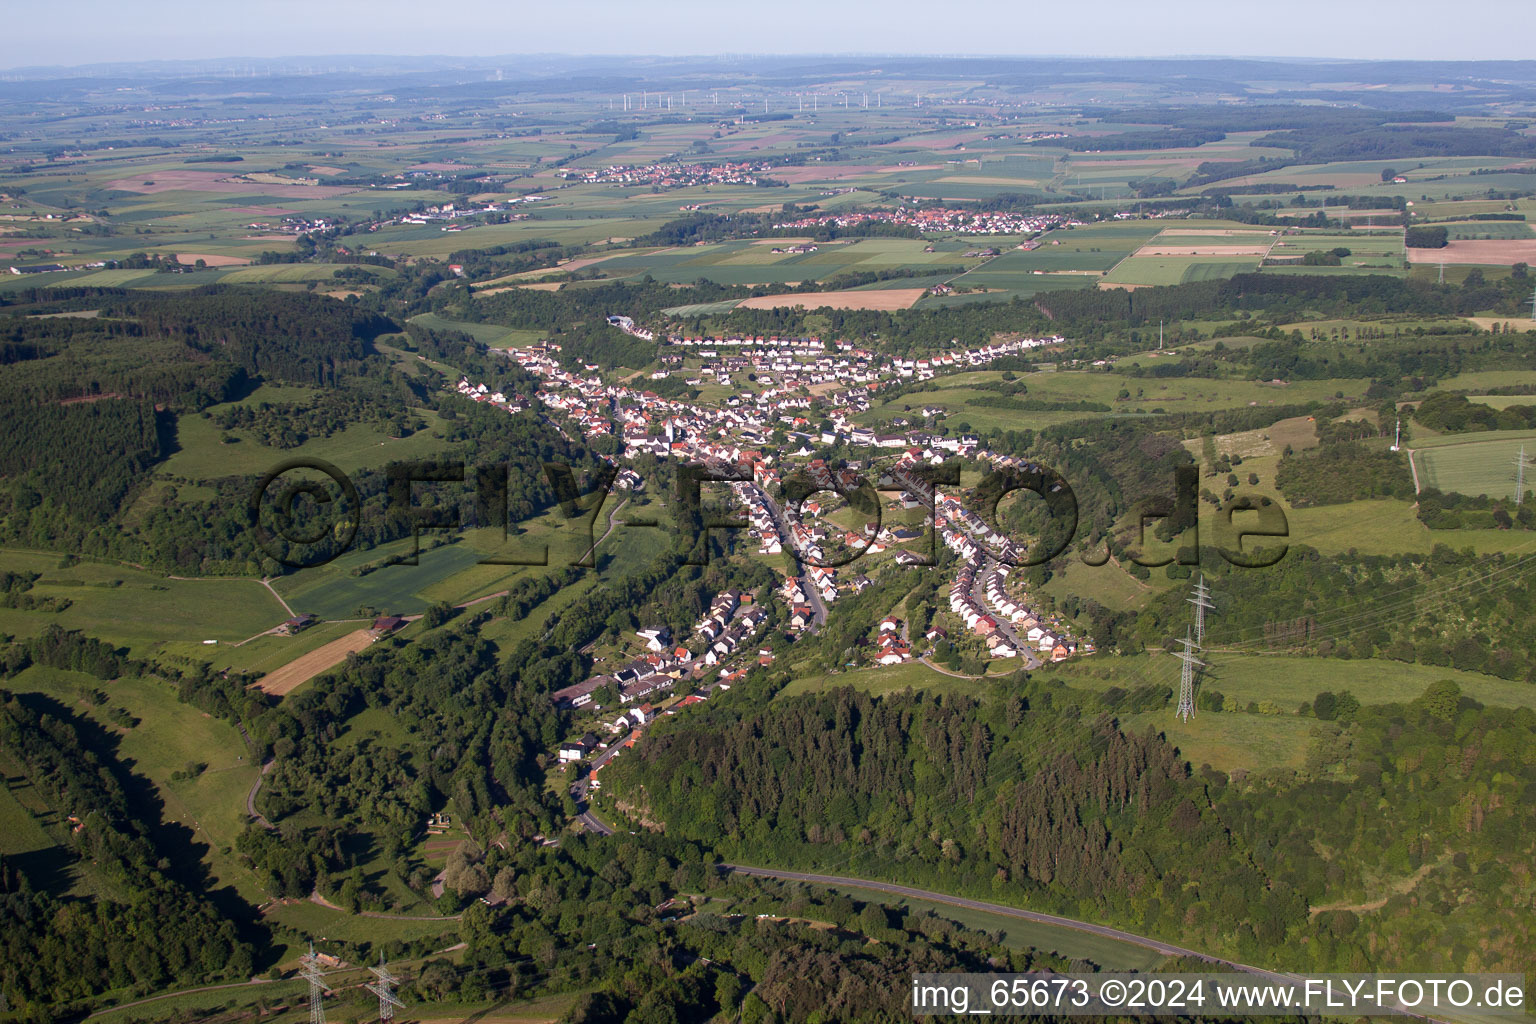 Village - view on the edge of forest, agricultural fields and farmland in the district Dalhausen in Beverungen in the state North Rhine-Westphalia, Germany